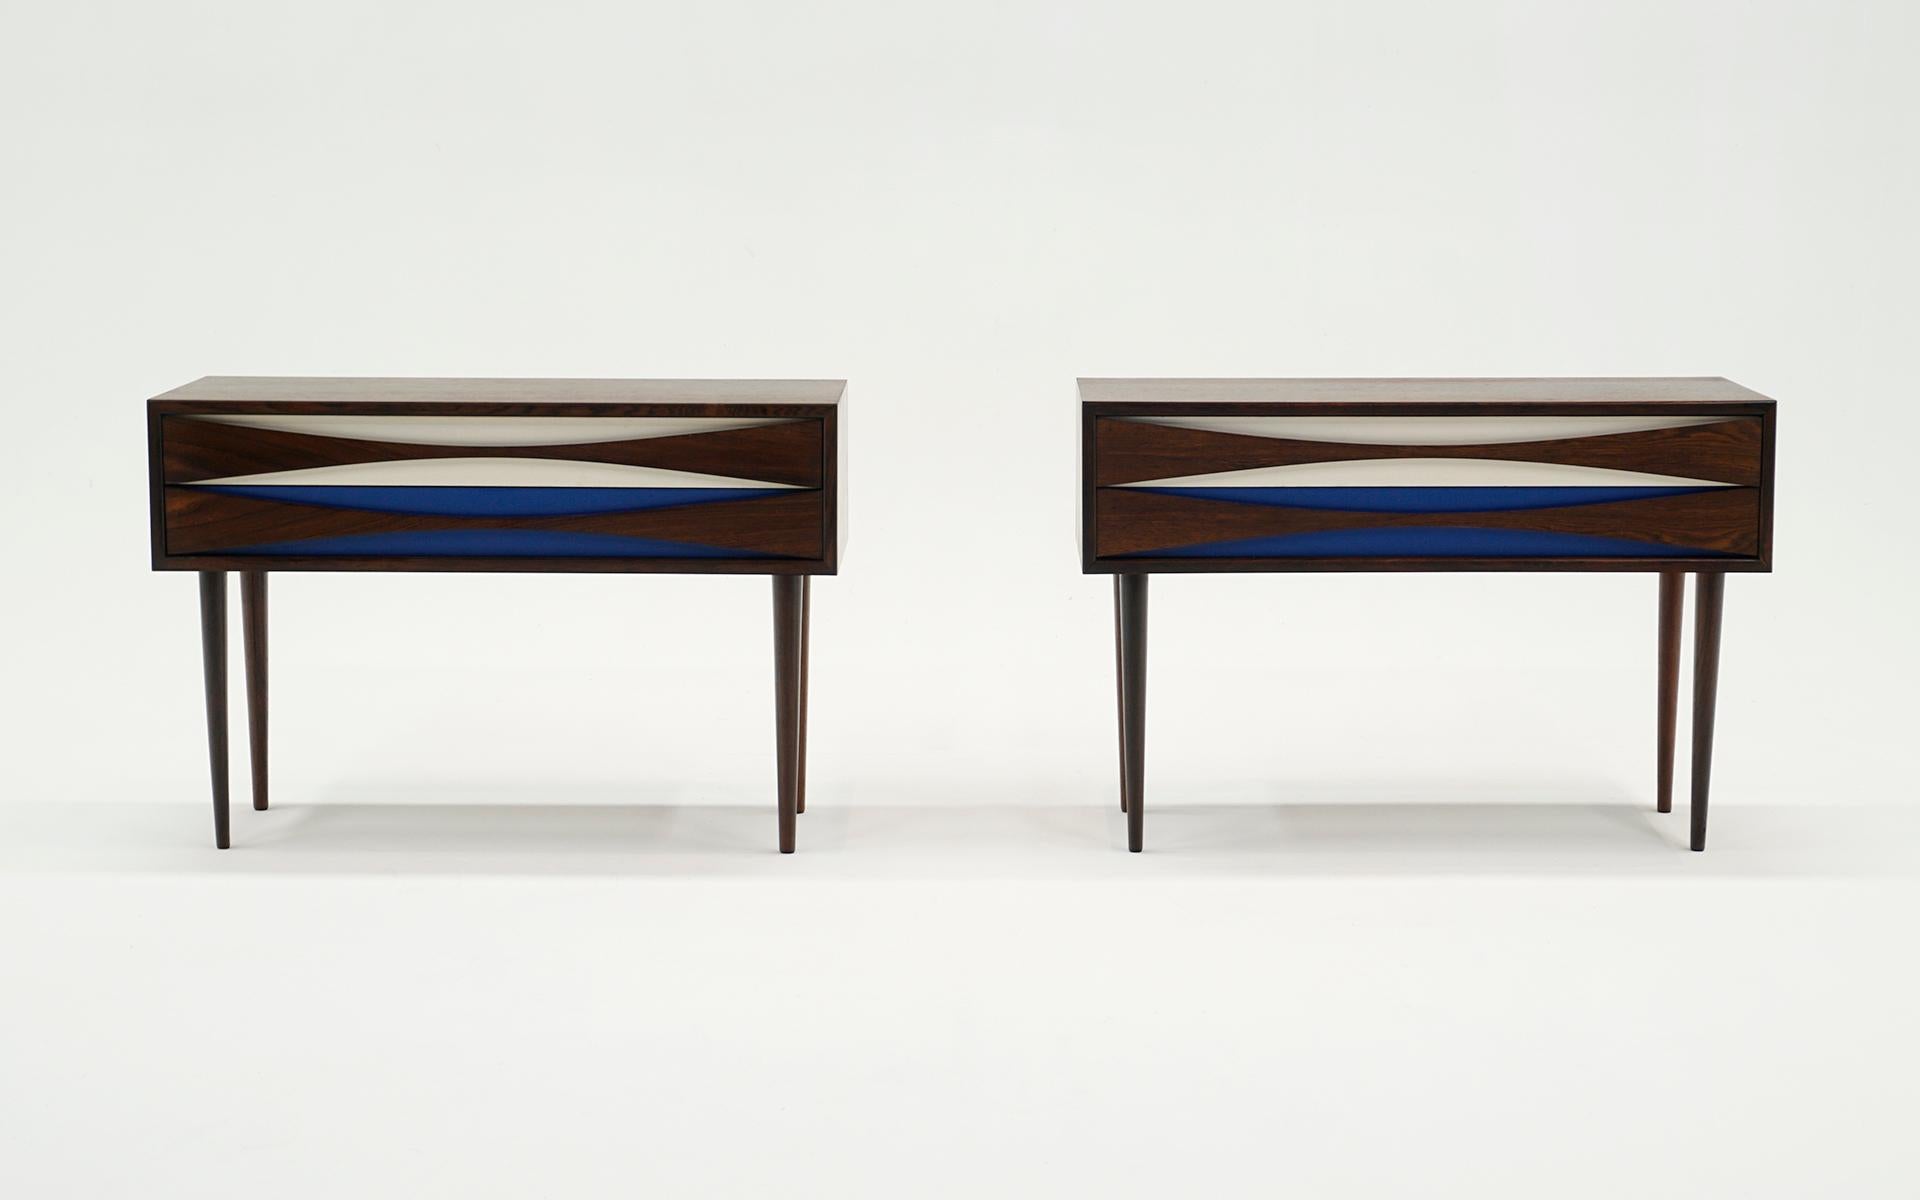 Pair of nightstands in Brazilian rosewood with blue and white drawer fronts designed by Niels Clausen, 1960s, Sweden.  Very good refinished condition and ready to use.  